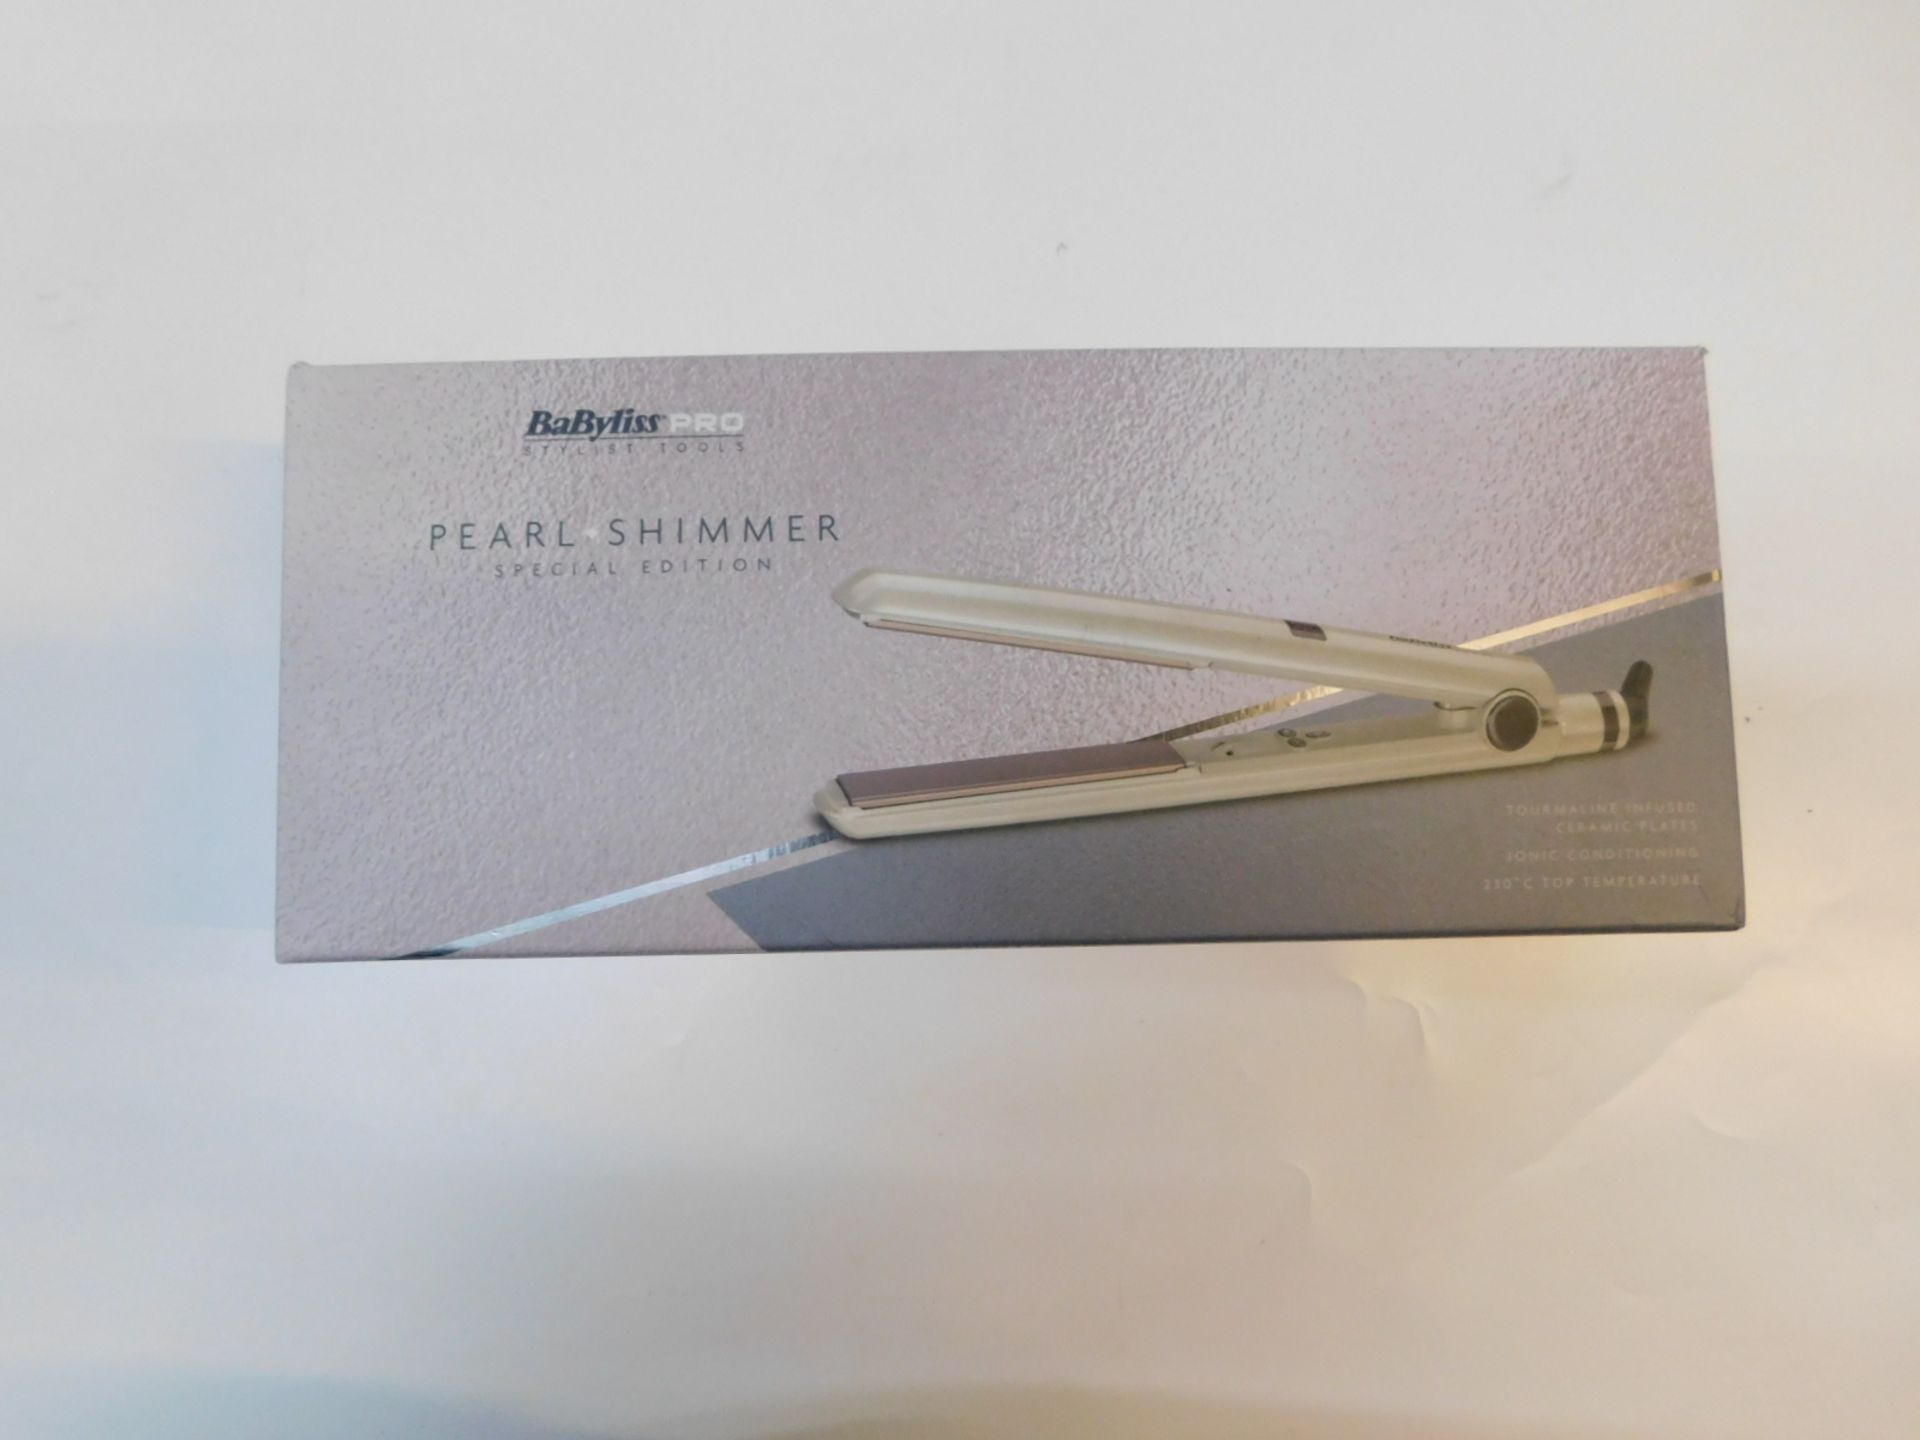 1 BOXED BABYLISS PRO PEARL SHIMMER SPECIAL EDITION HAIR STRAIGHTENERS RRP Â£39.99